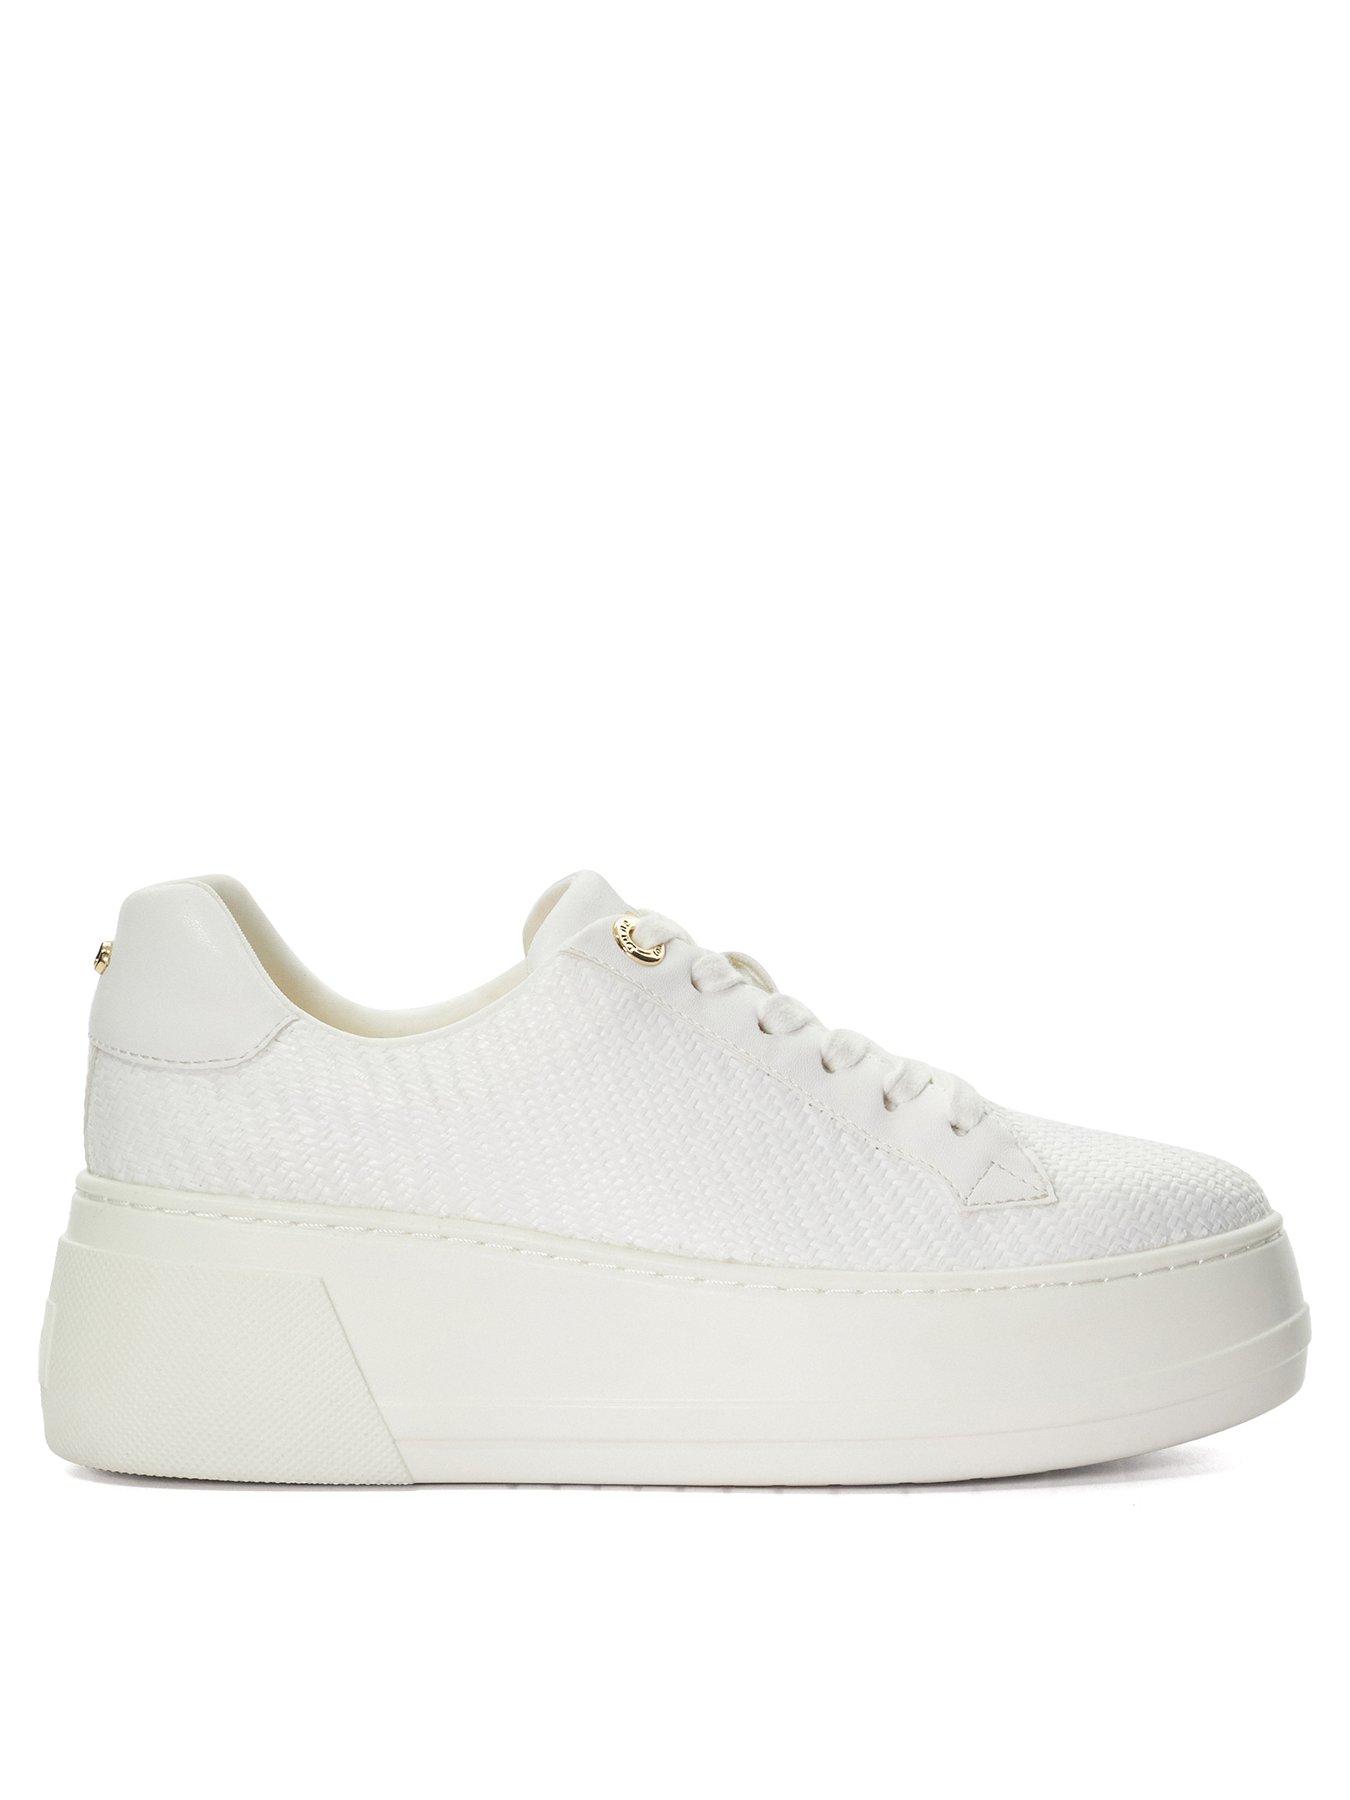 Dune London Tebb sneakers in white leather | ASOS